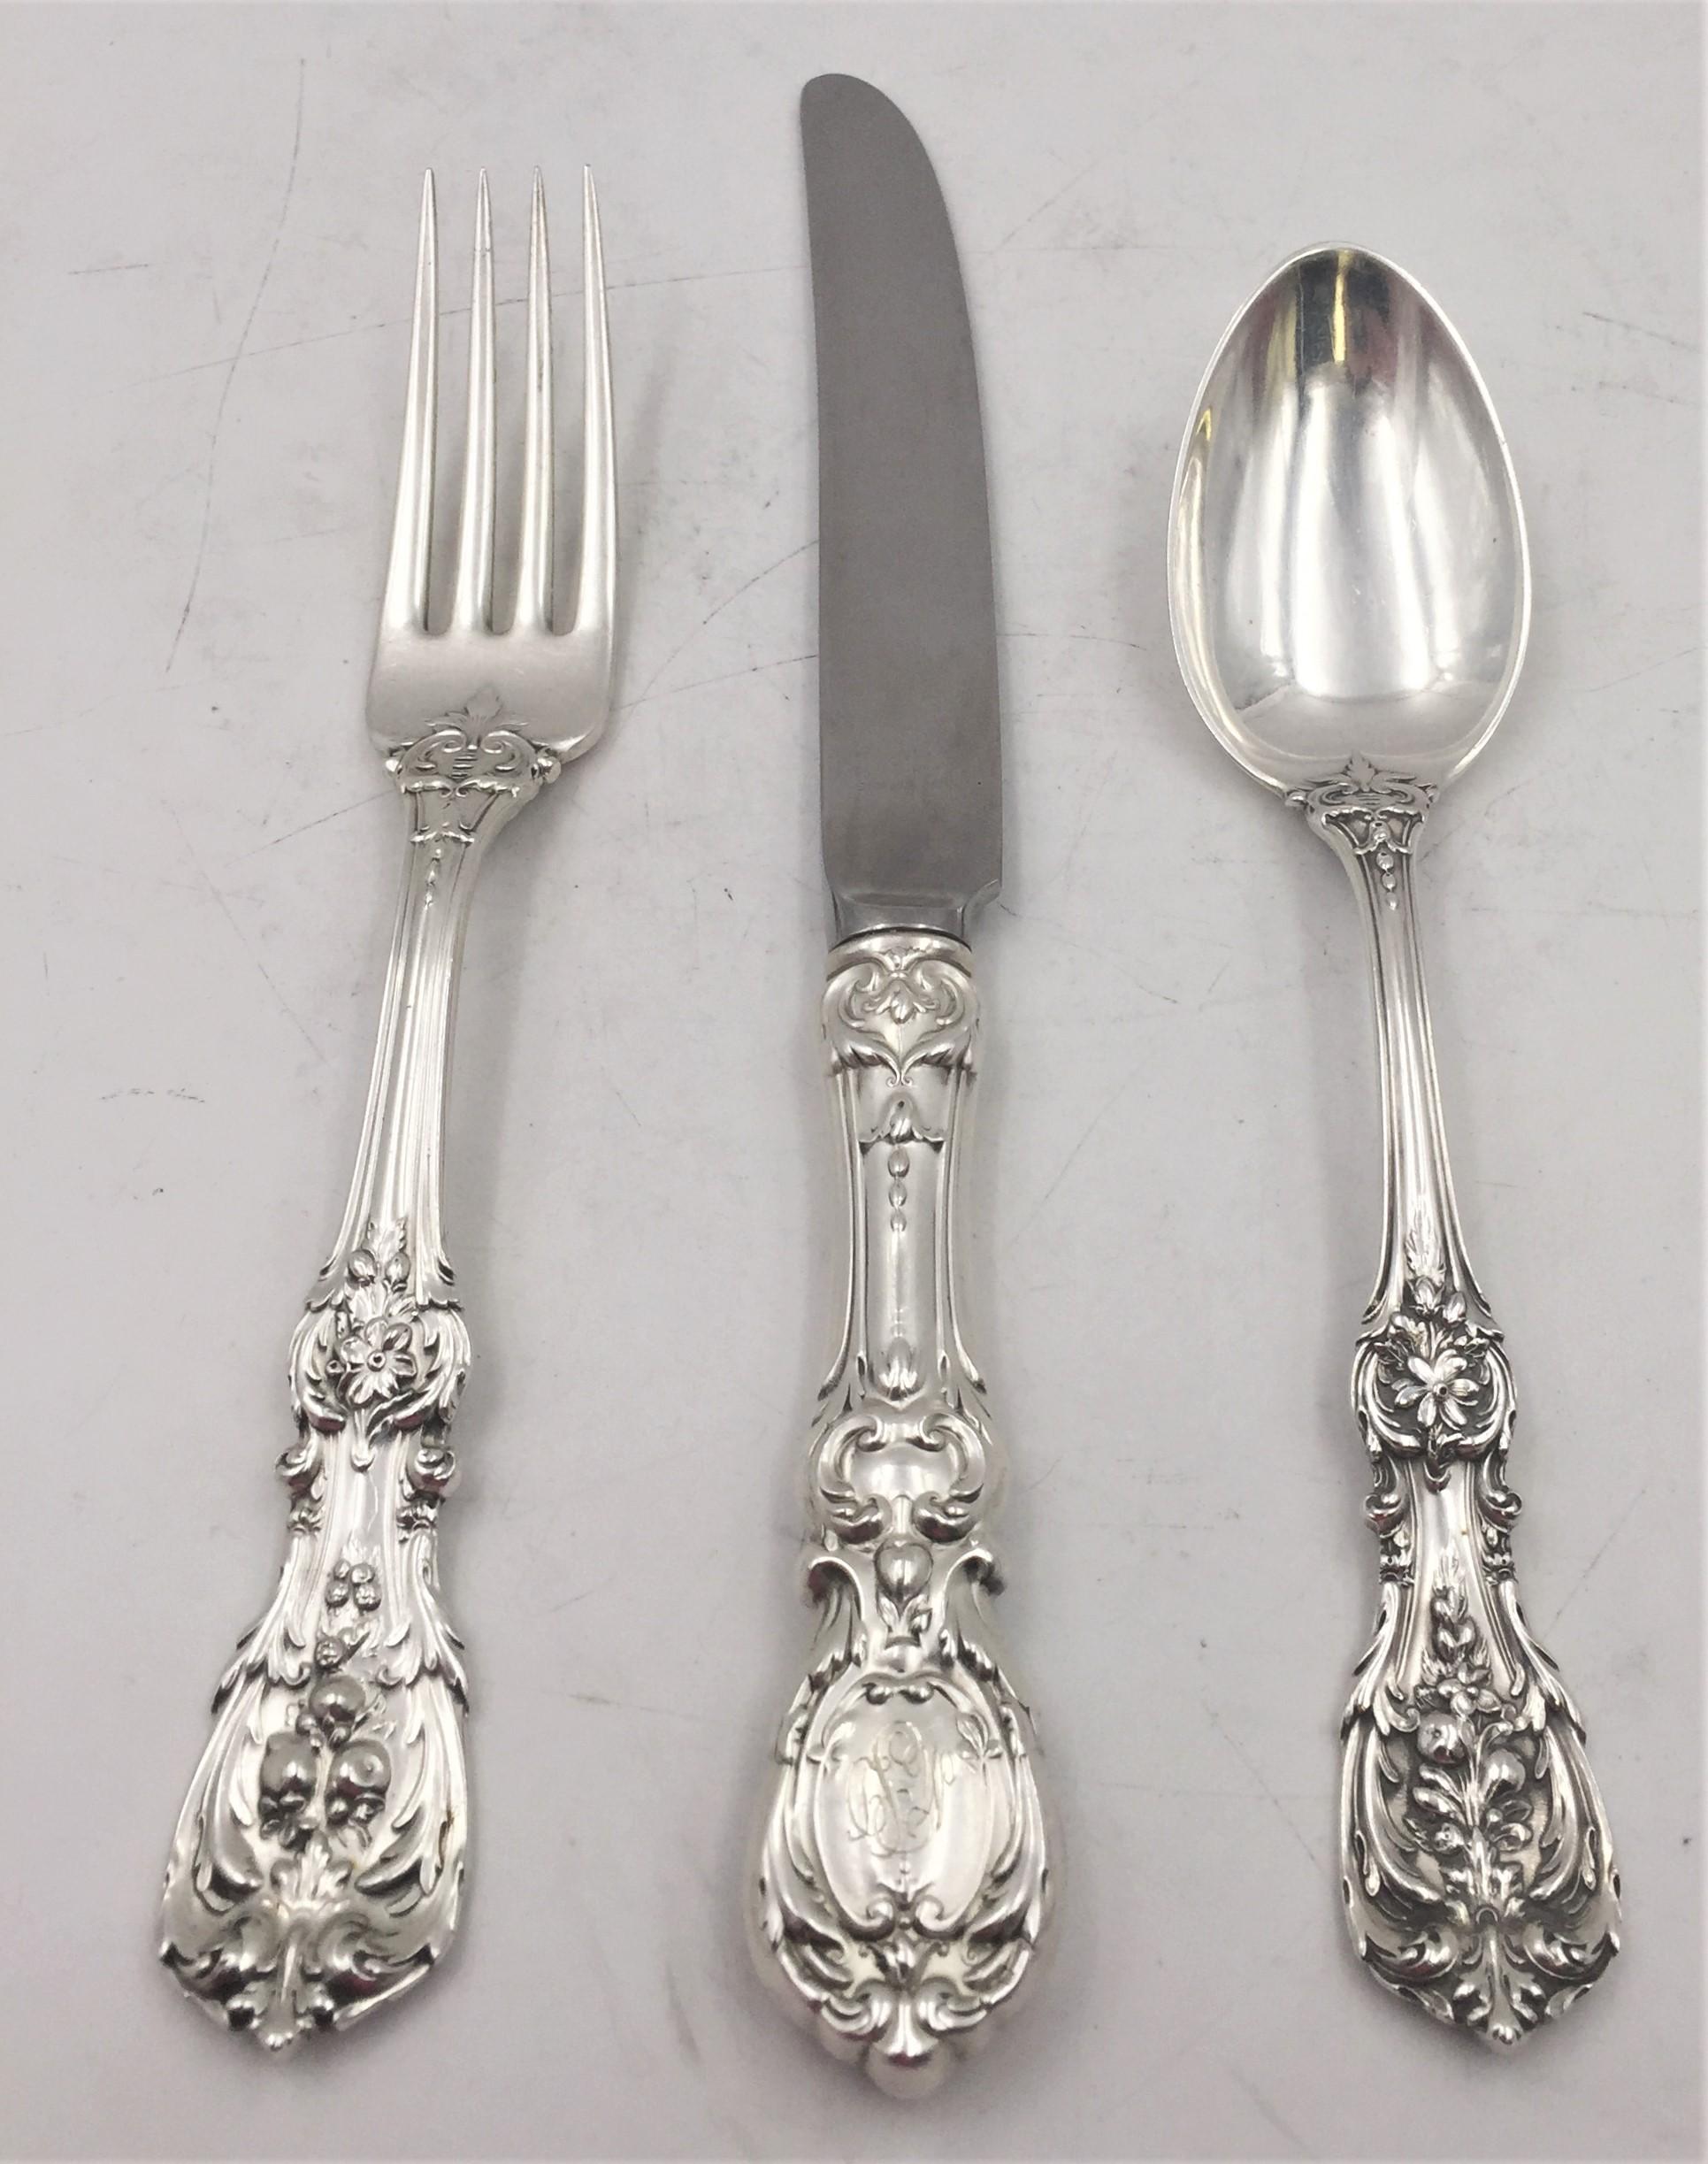 205-piece Reed & Barton sterling silver flatware set in celebrated Francis I pattern with exquisite fruit and floral motifs in Art Nouveau Style, consisting of:

12 forks measuring 8'' in length

18 salad forks measuring 6 1/4'' in length

12